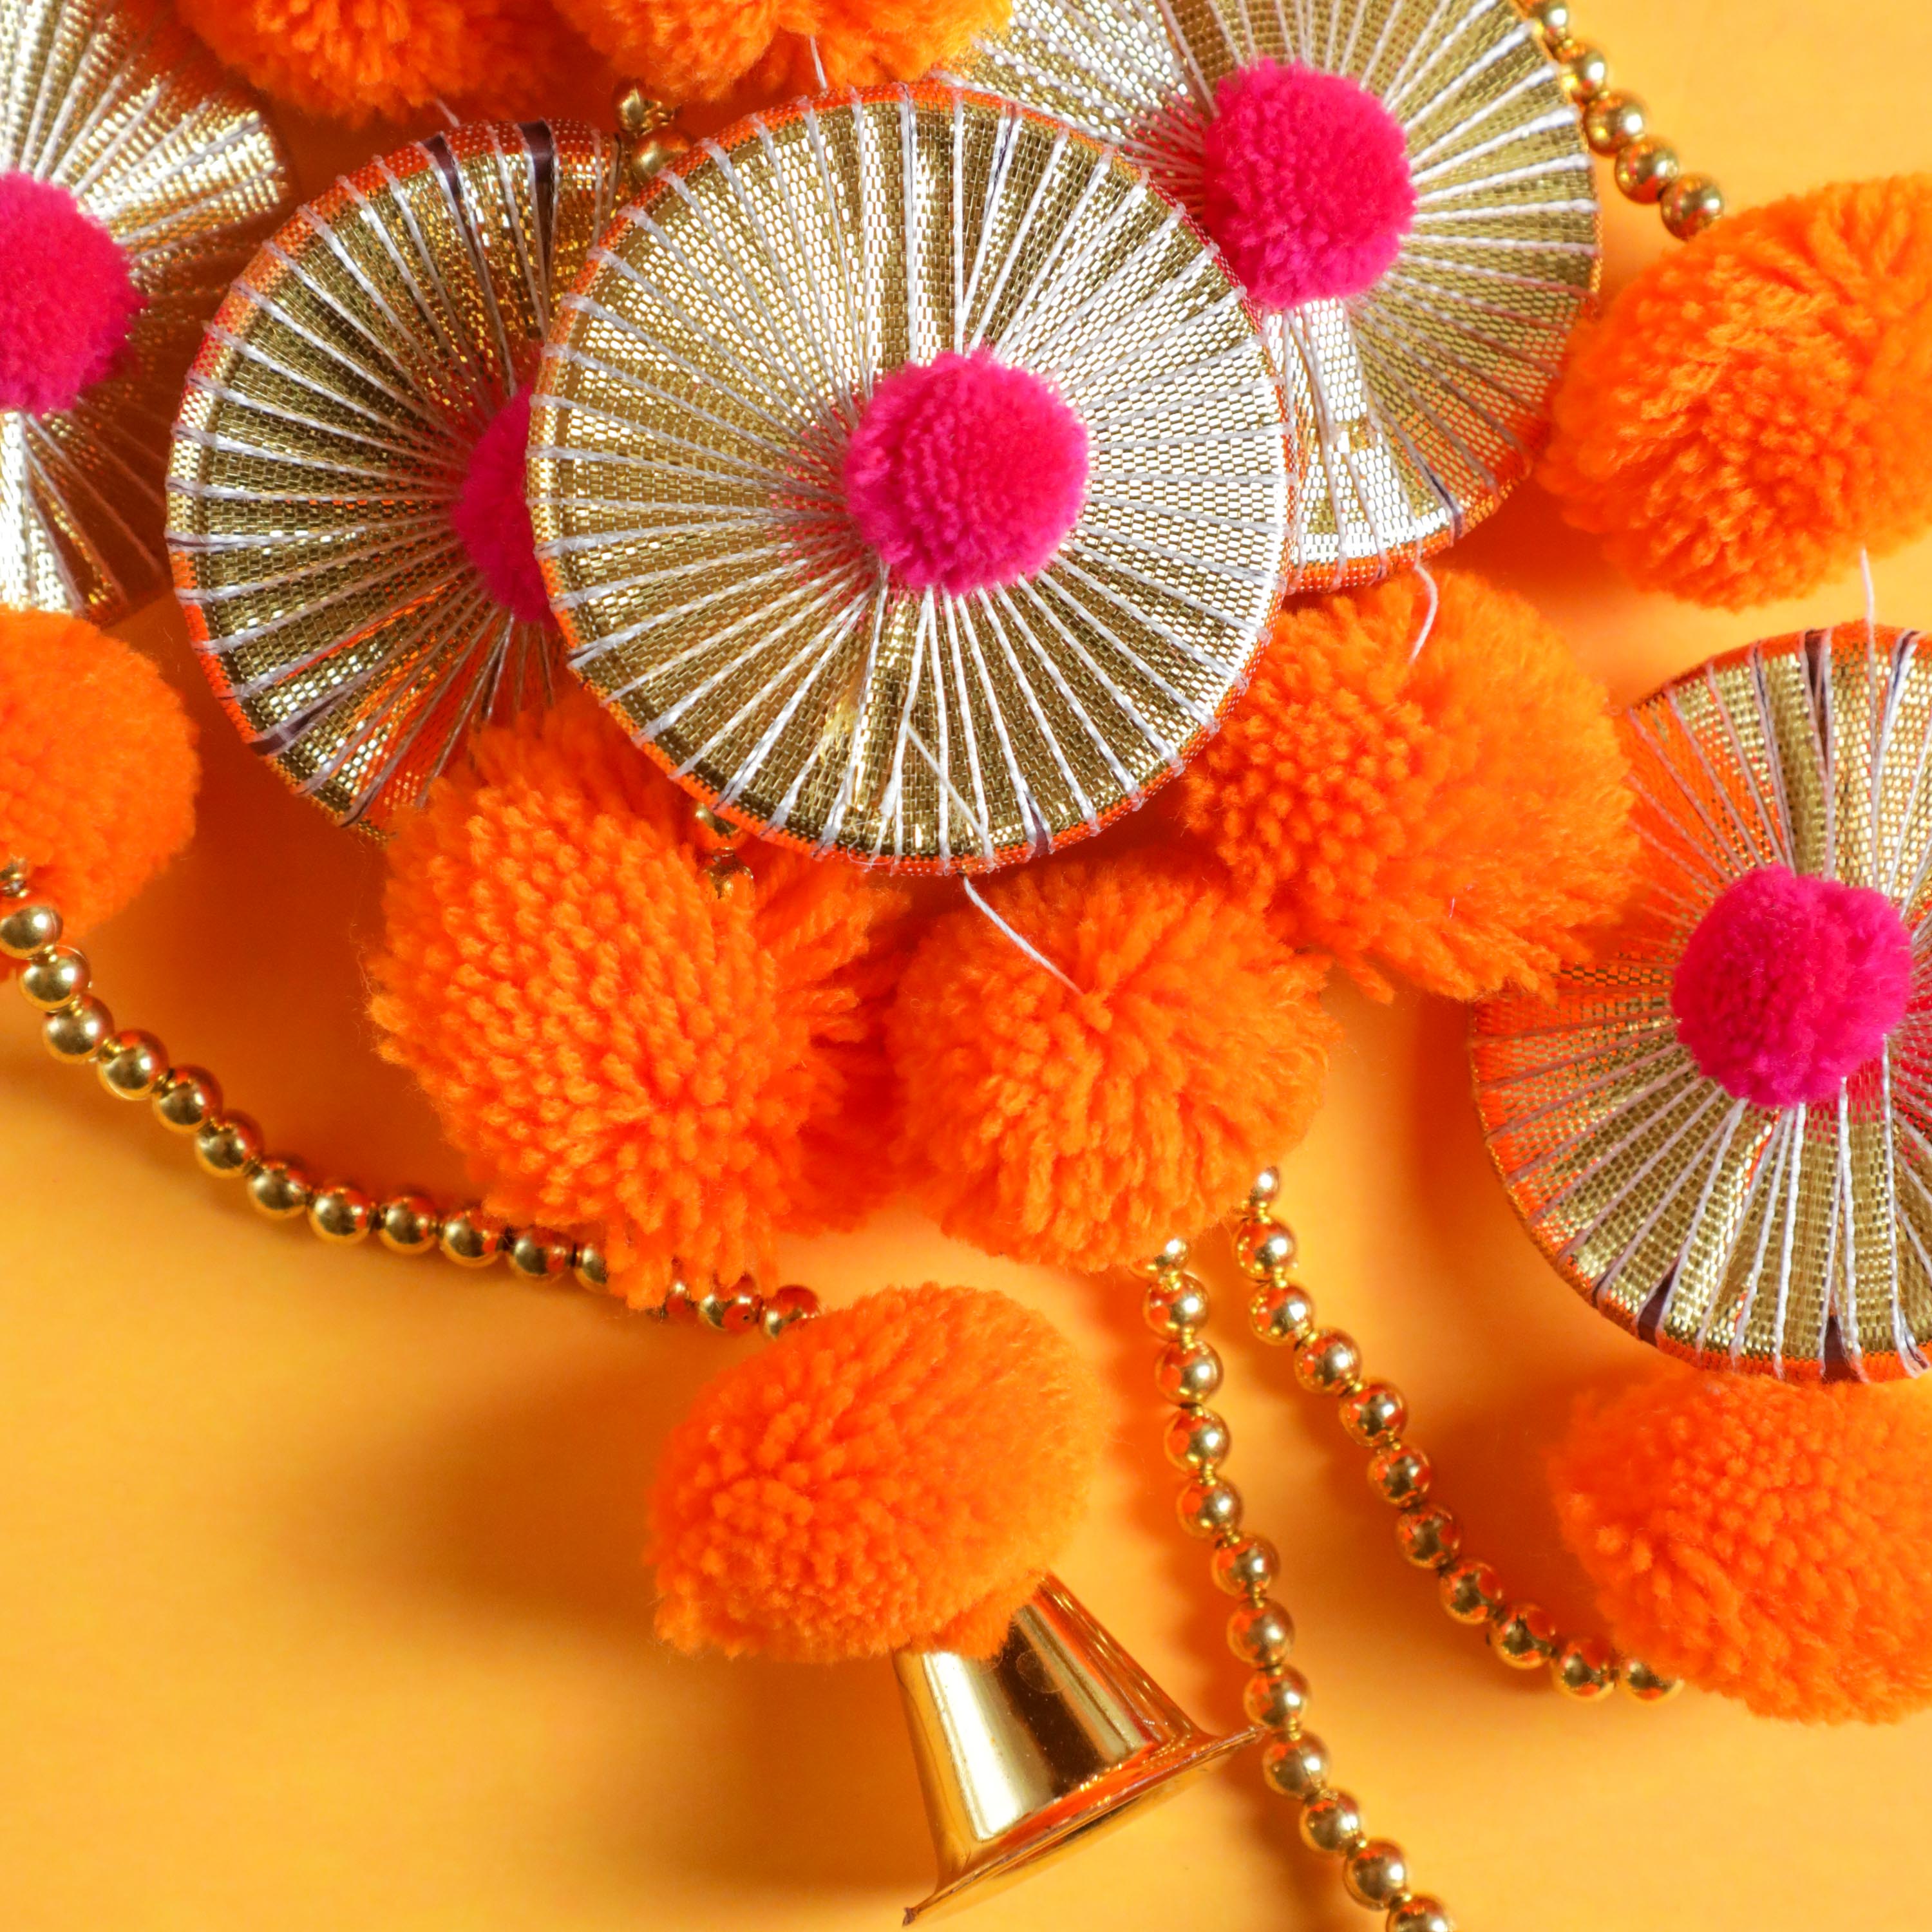 Colorful Pom pom garlands with danglers